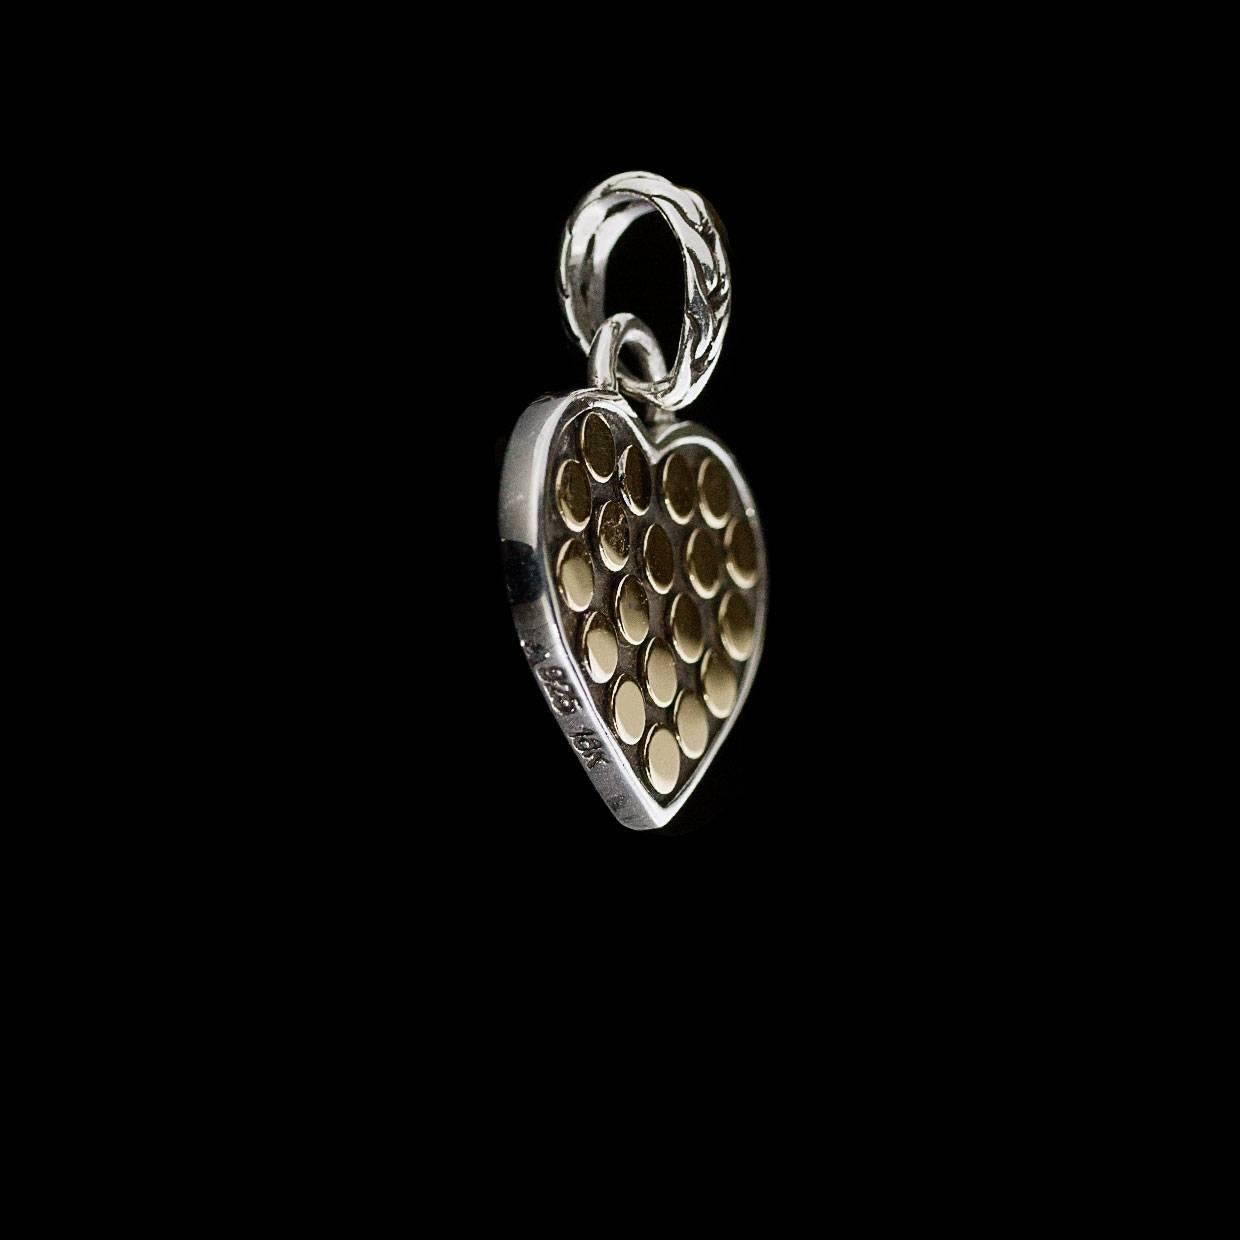 Each piece of John Hardy jewelry has been crafted in Bali since 1975. John Hardy is dedicated to creating timeless one-of-a-kind pieces that are brilliantly alive.

This sterling silver pendant is retired from John Hardy's Jaisalmer Dot collection.